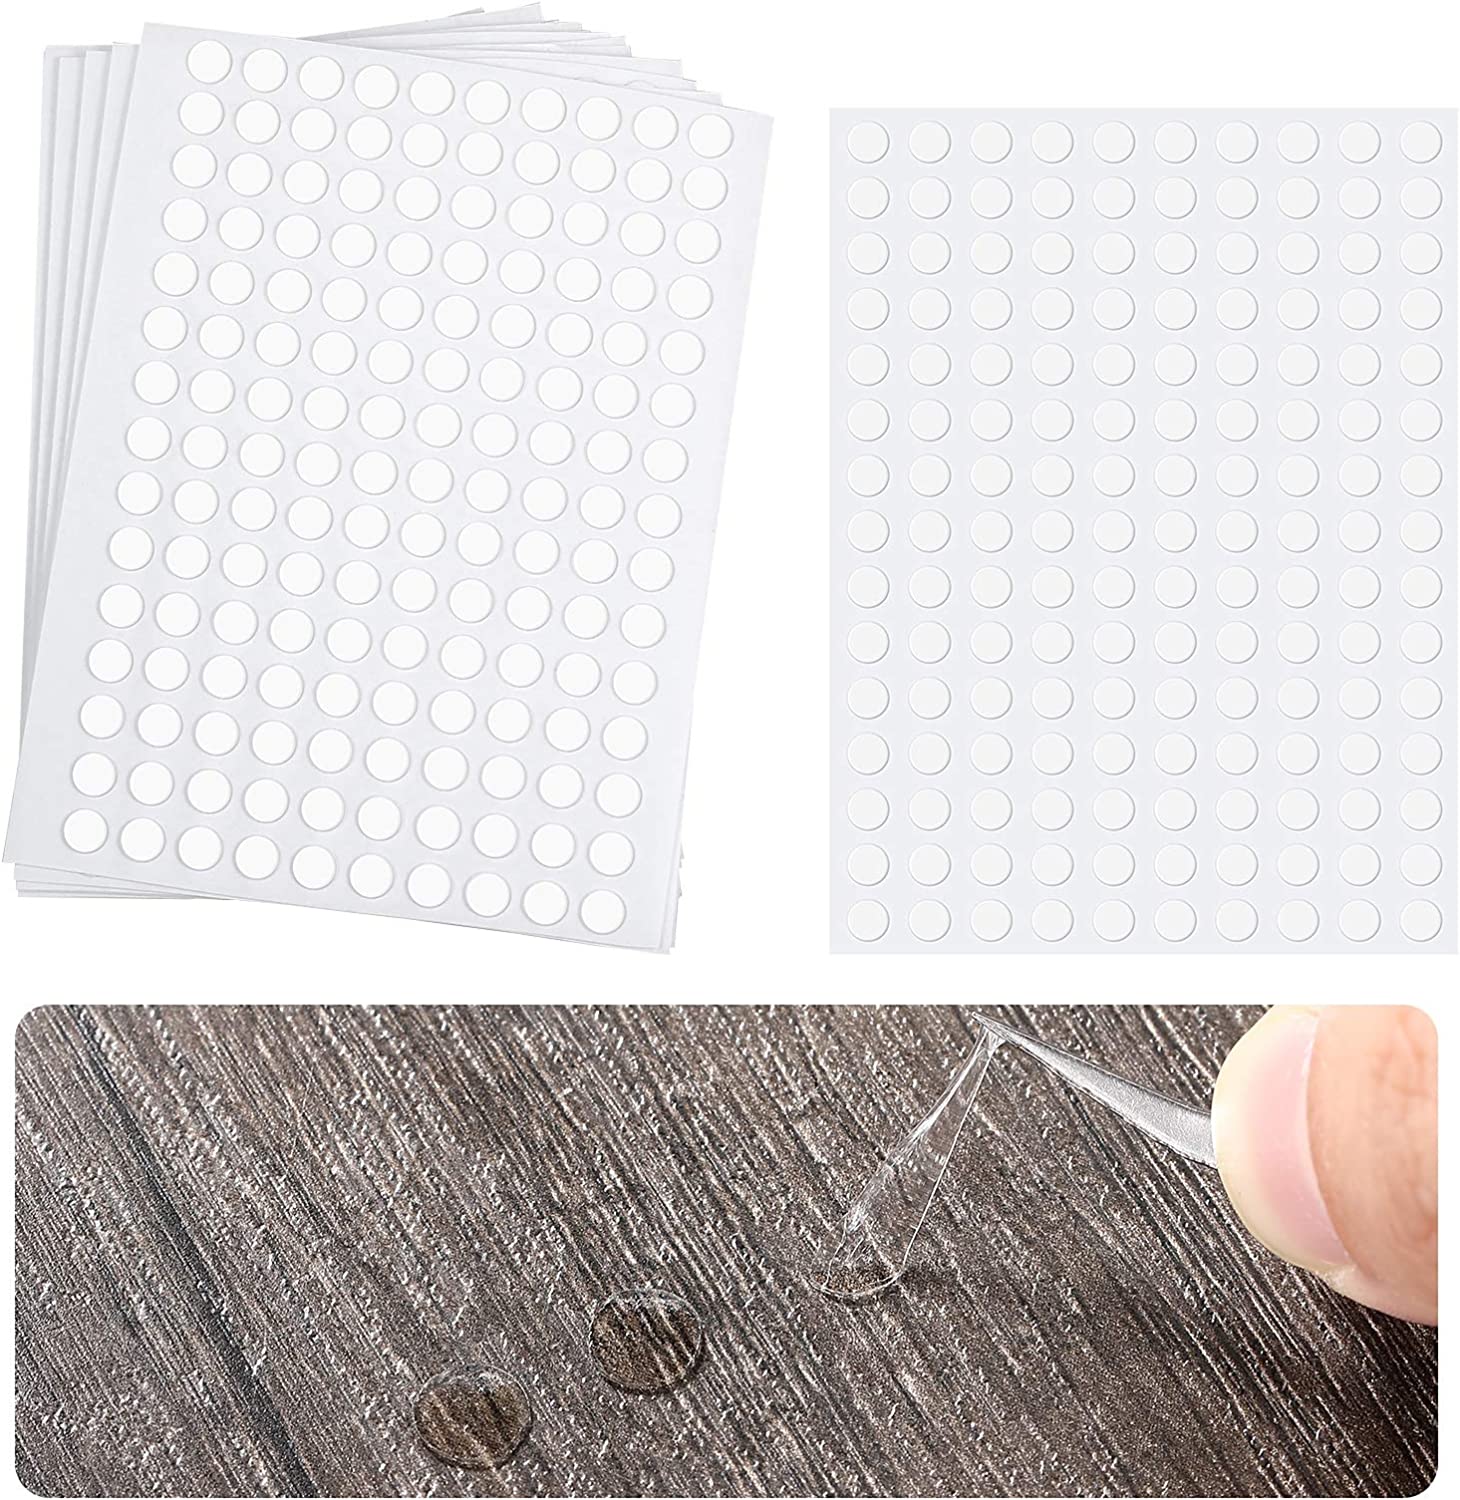 Double-Sided Adhesive Dots Transparent Double-Sided Tape Stickers Round Acrylic No Traces Strong Adhesive Sticker Waterproof Dot Sticker for Craft DIY